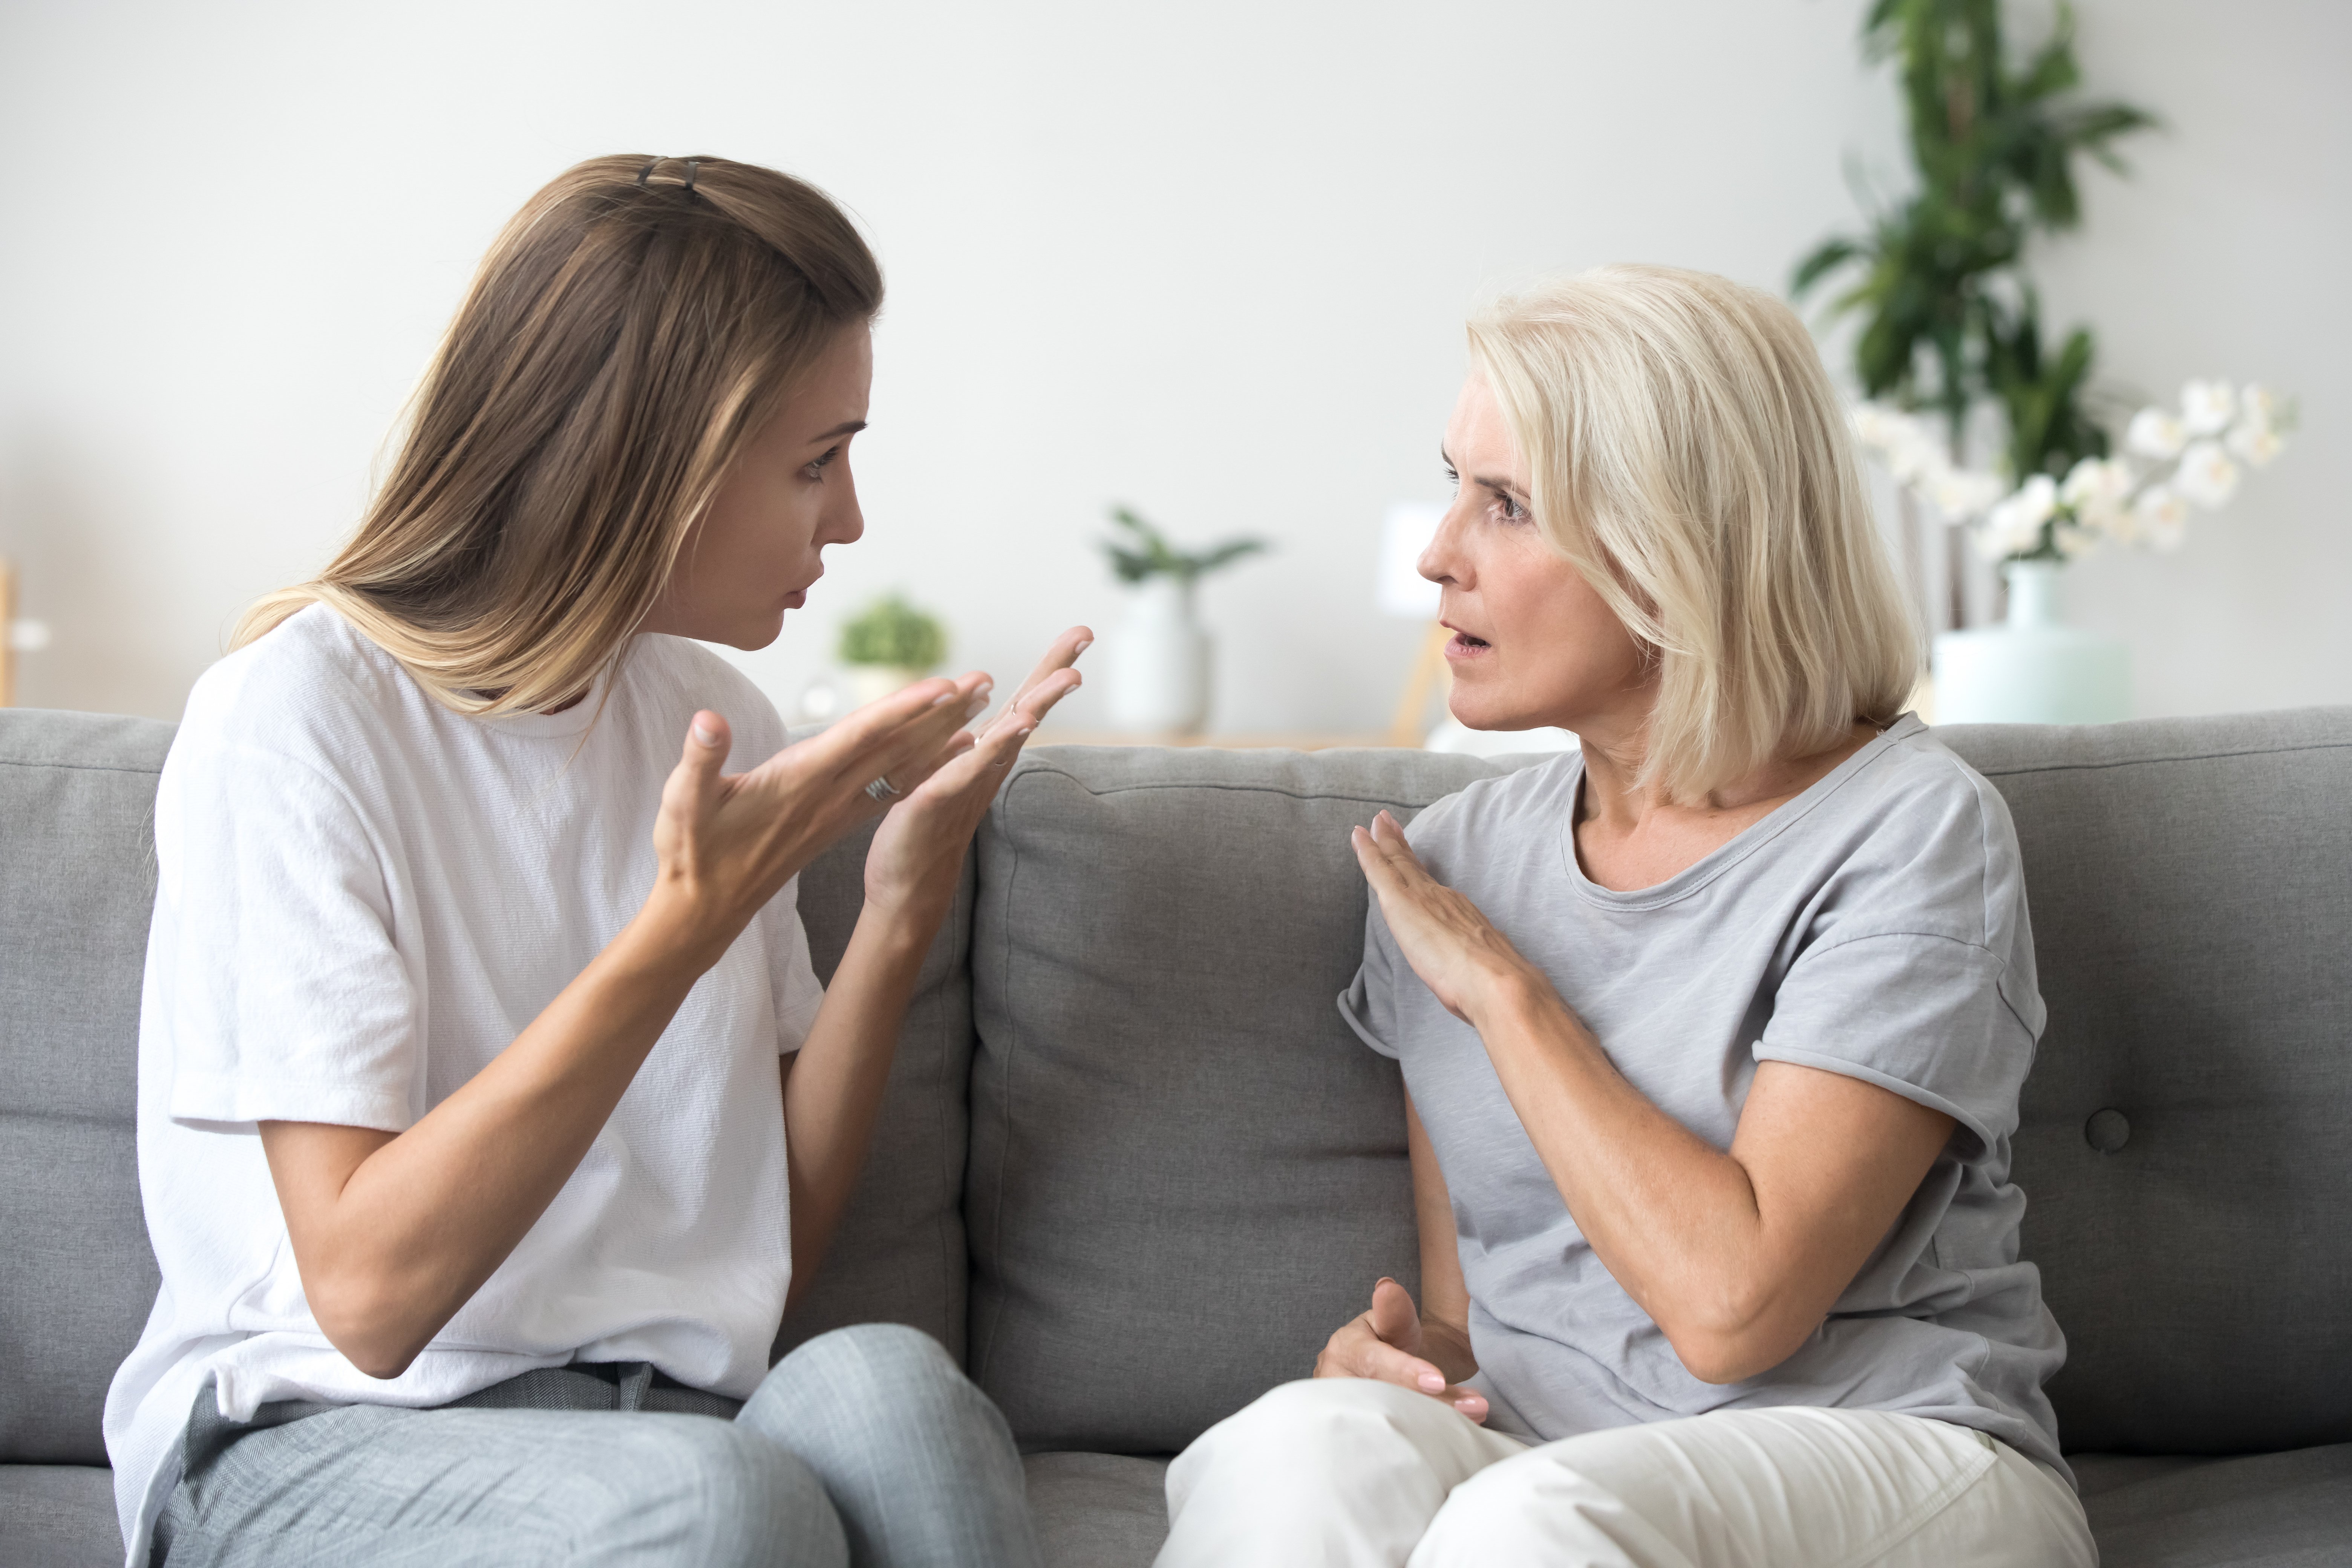 Elderly woman arguing with younger woman. | Photo: Shutterstock